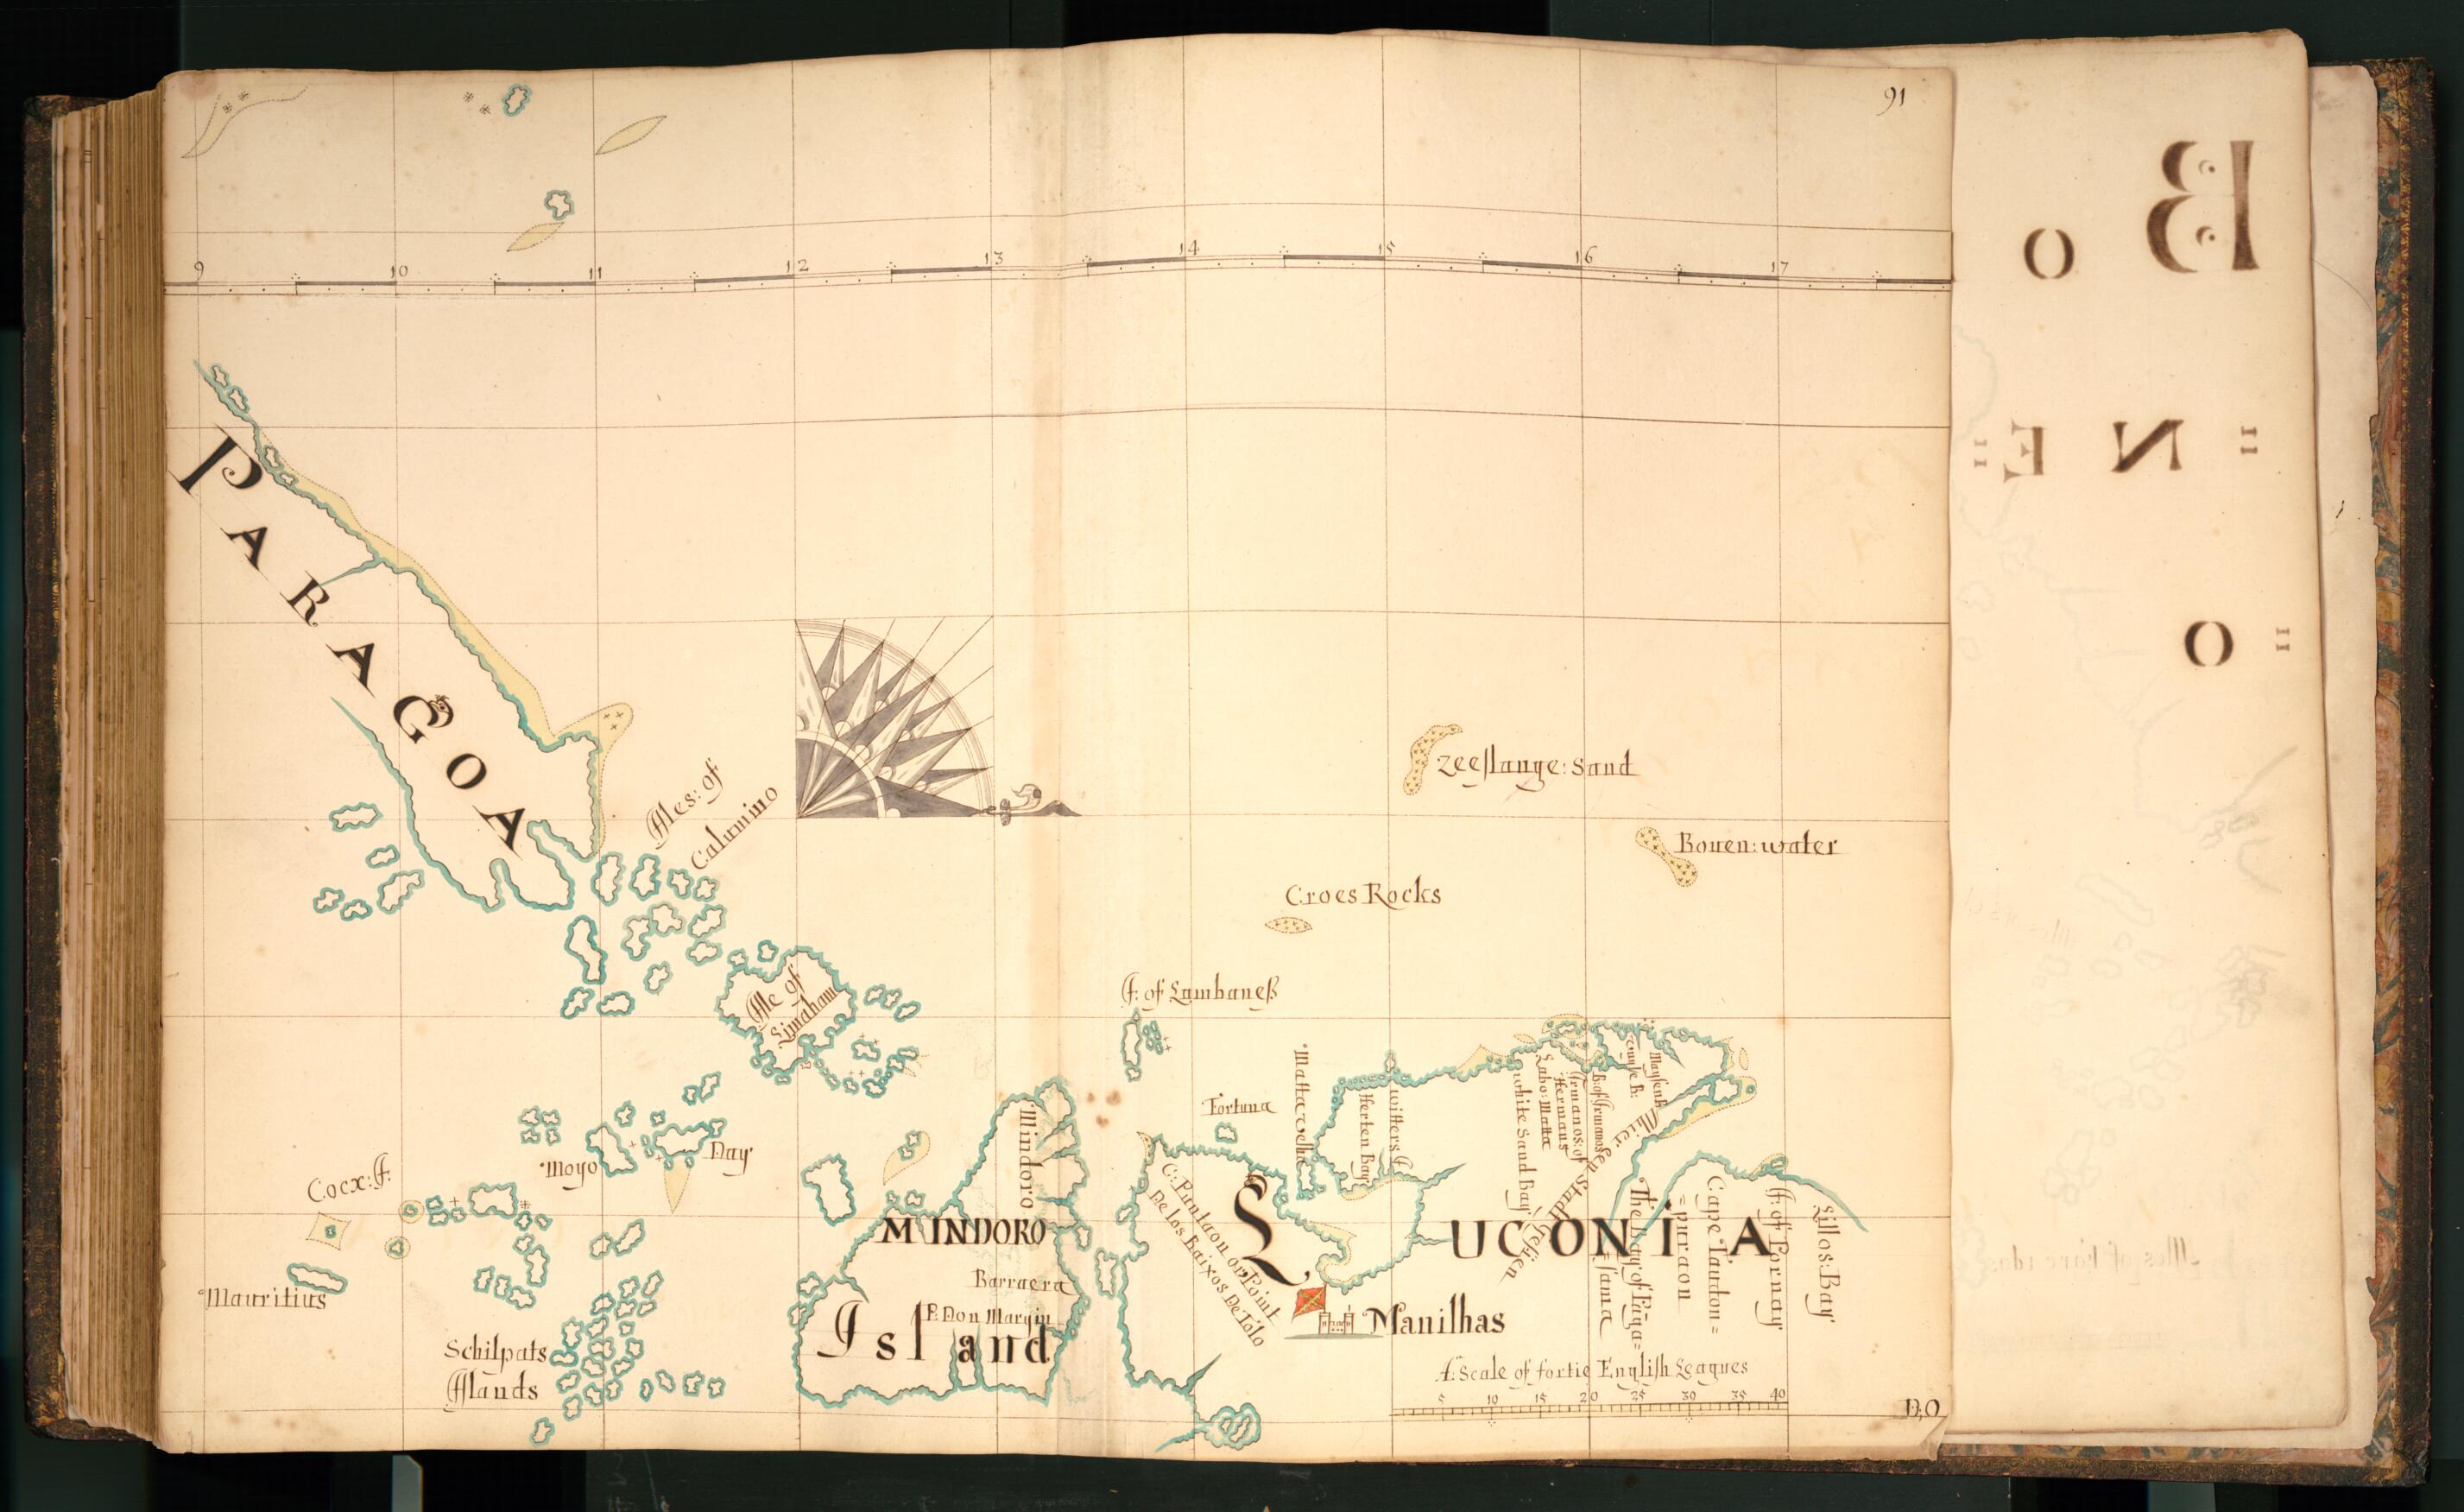 This old map of 91) Paragoa, Mindoro Island, Luconia from Buccaneer Atlas from 1690 was created by William Hacke in 1690